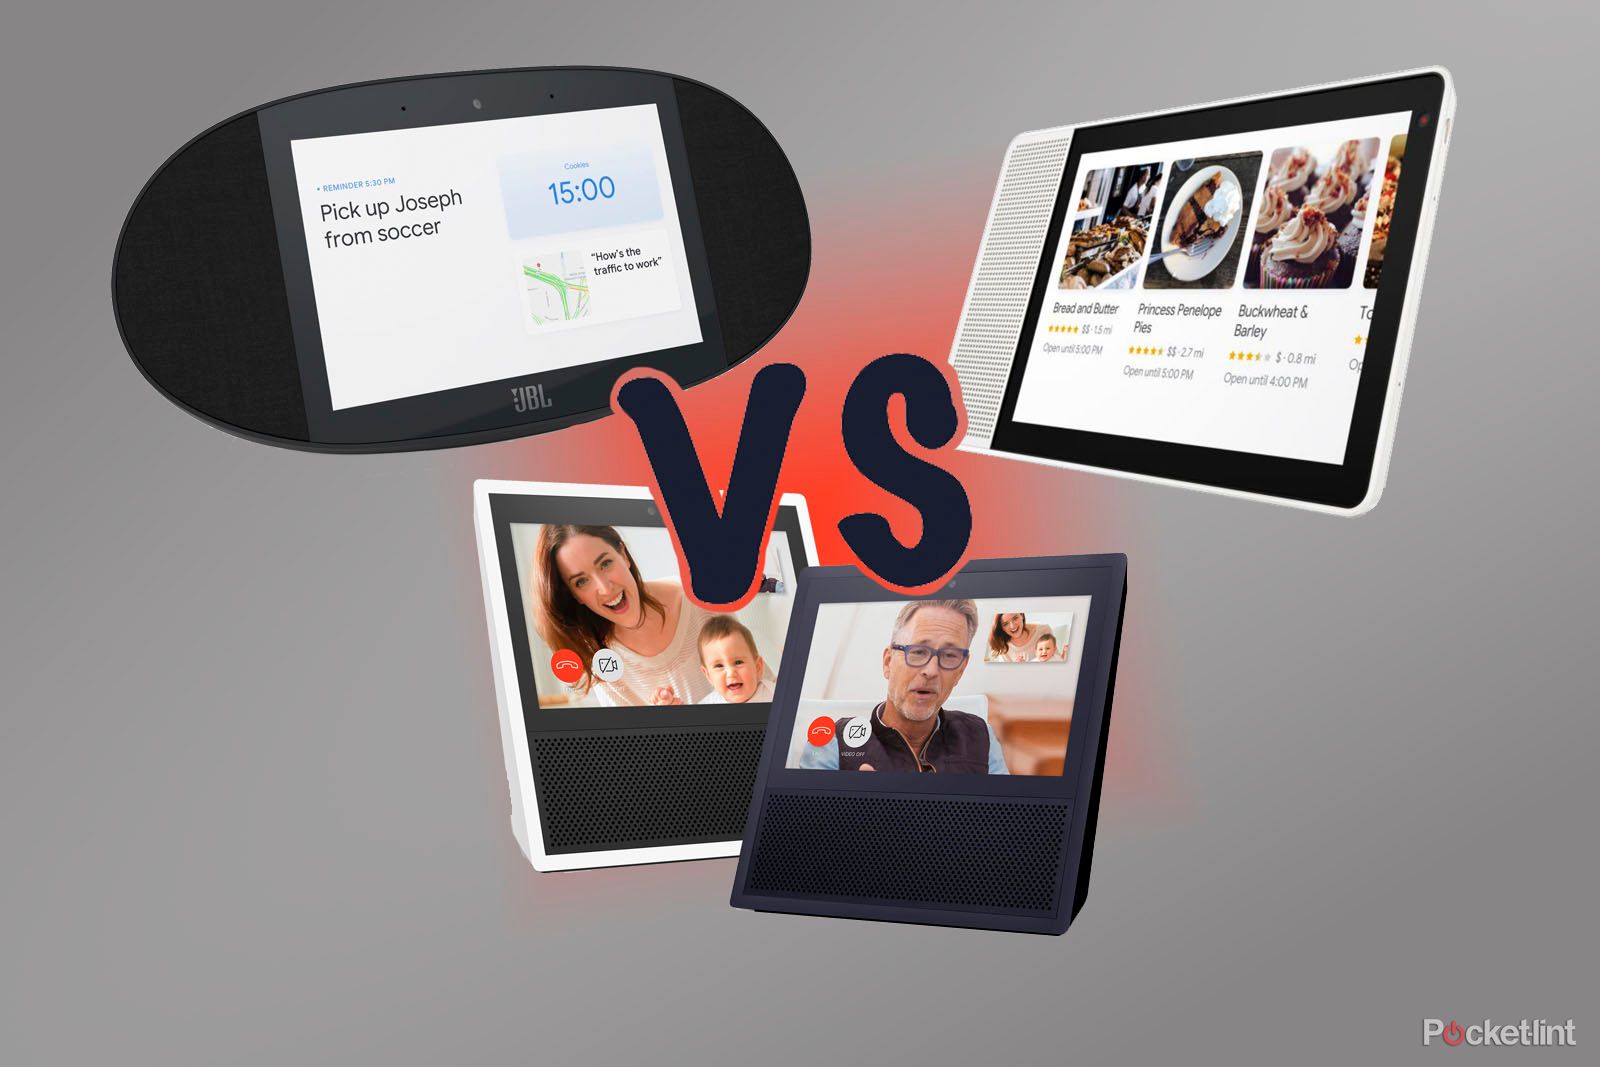 Echo Show Vs Lenovo Smart Display Vs Jbl Link View New Year New Smart Display Devices image 1